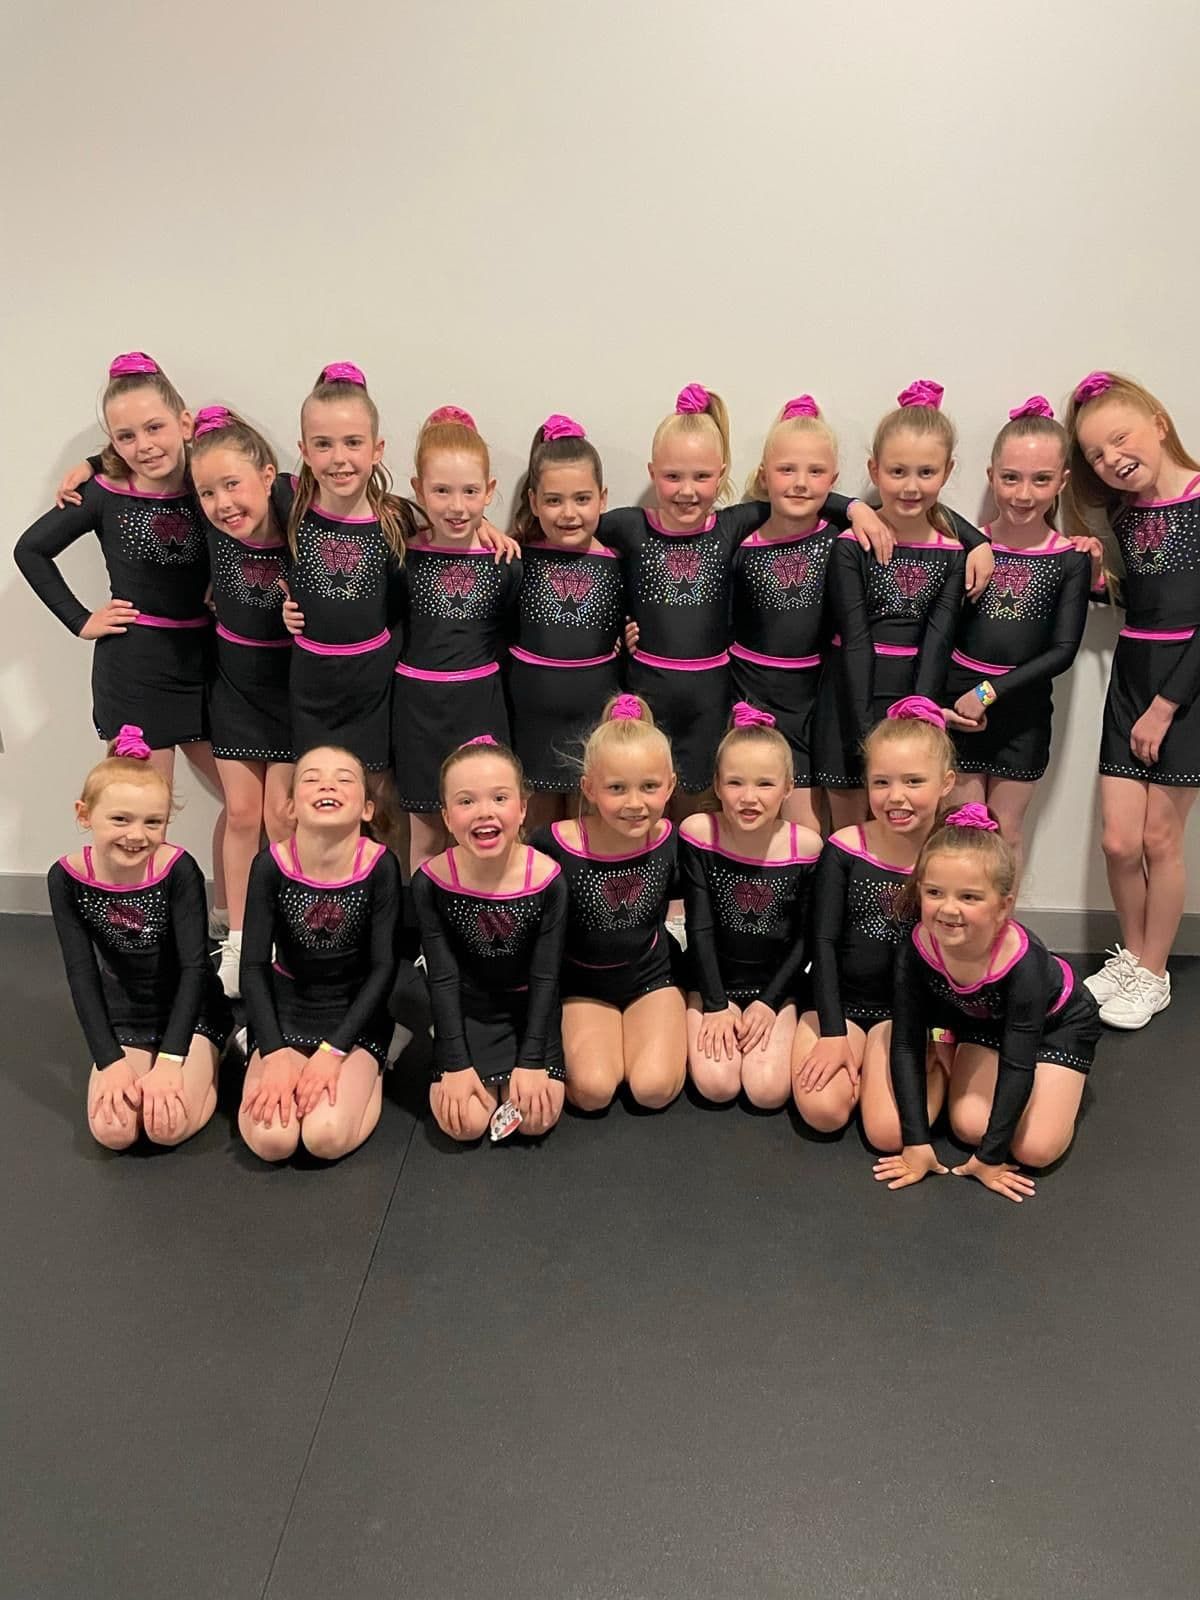 A group photo of young girls in cheer outfits all smiling.